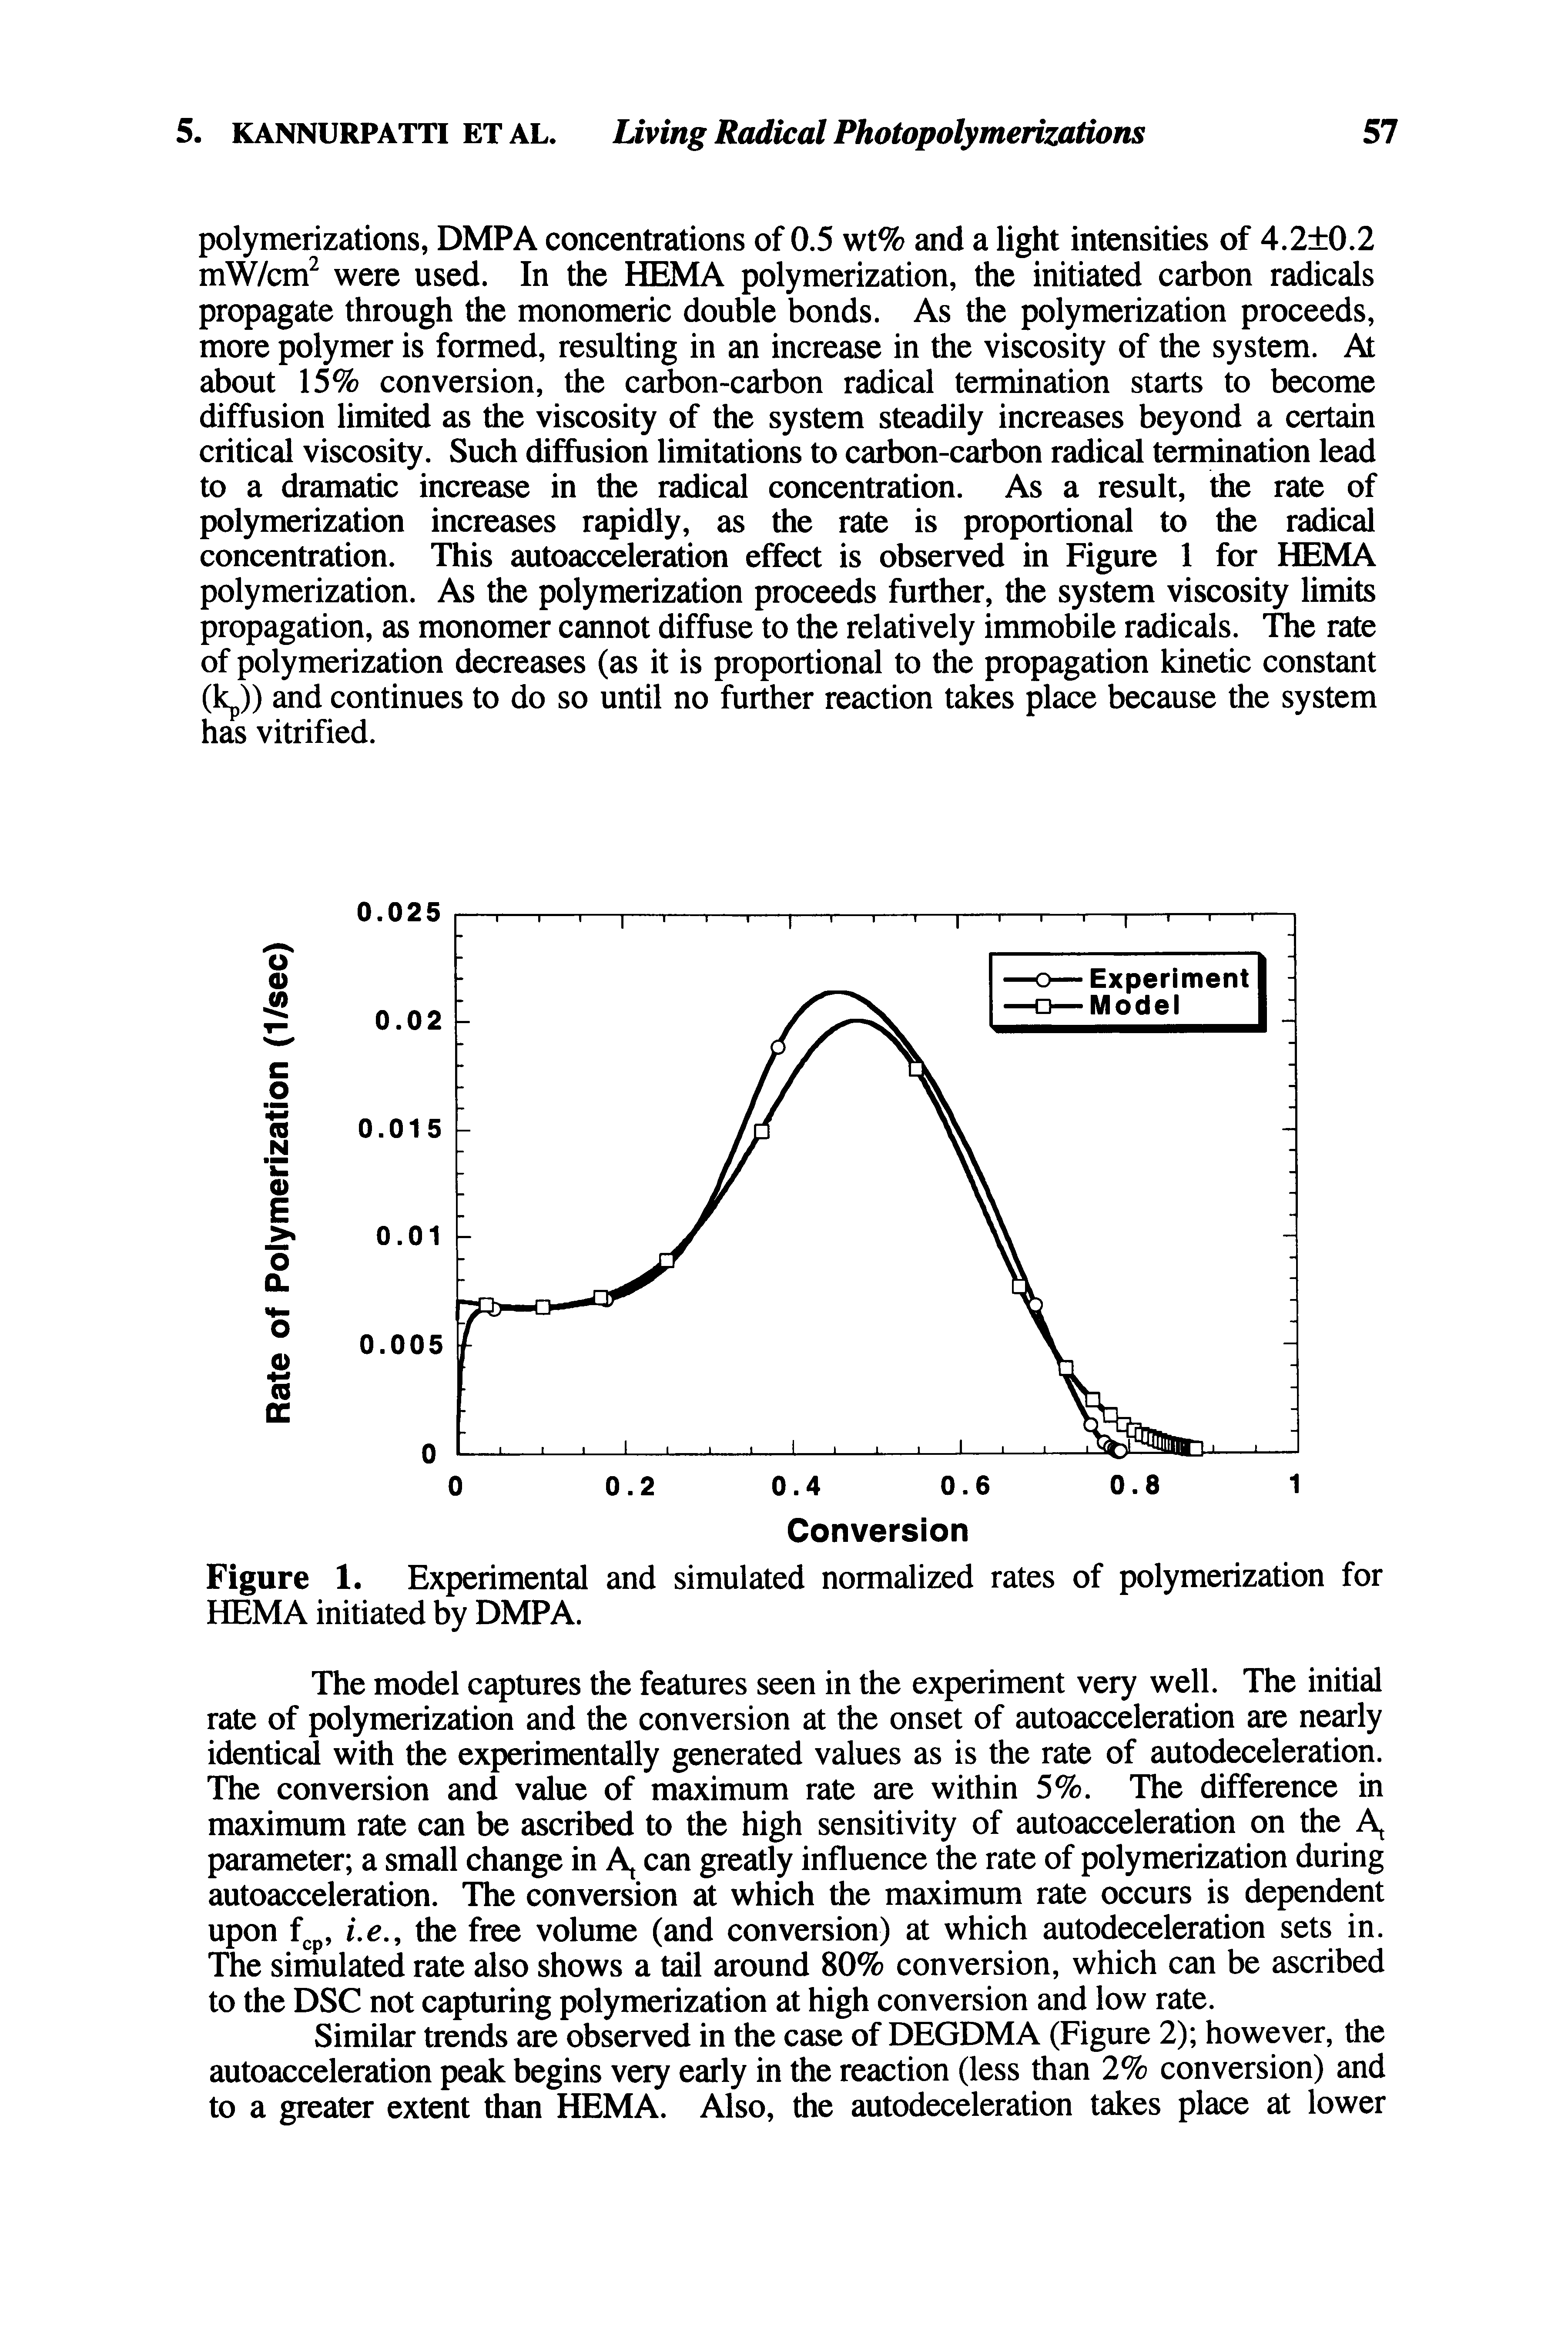 Figure 1. Experimental and simulated normalized rates of polymerization for HEMA initiated by DMPA.